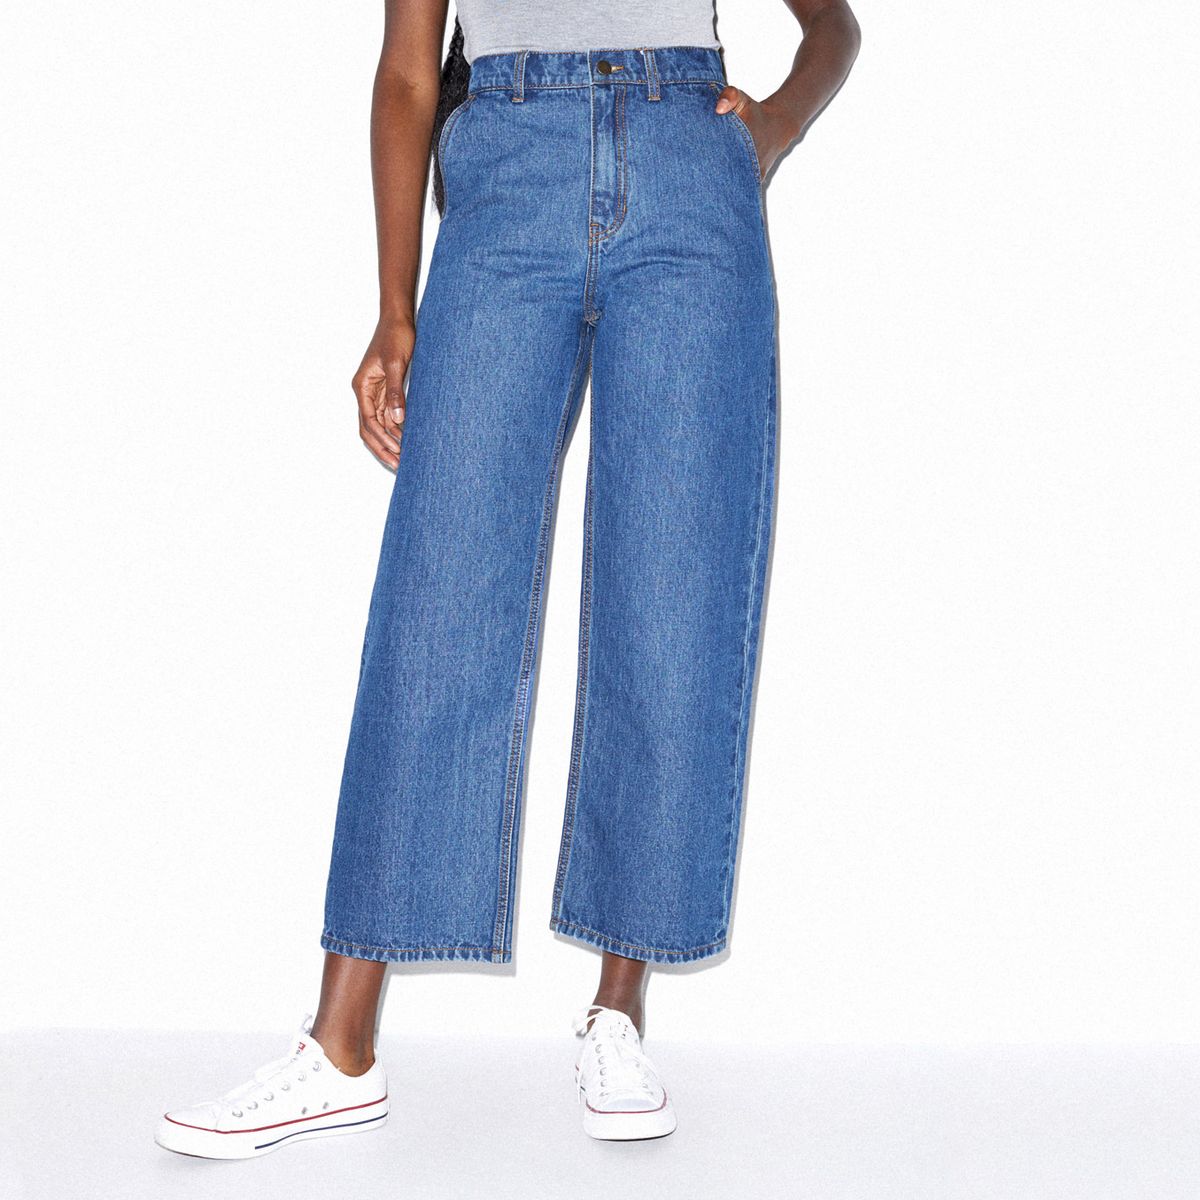 the most flattering jeans